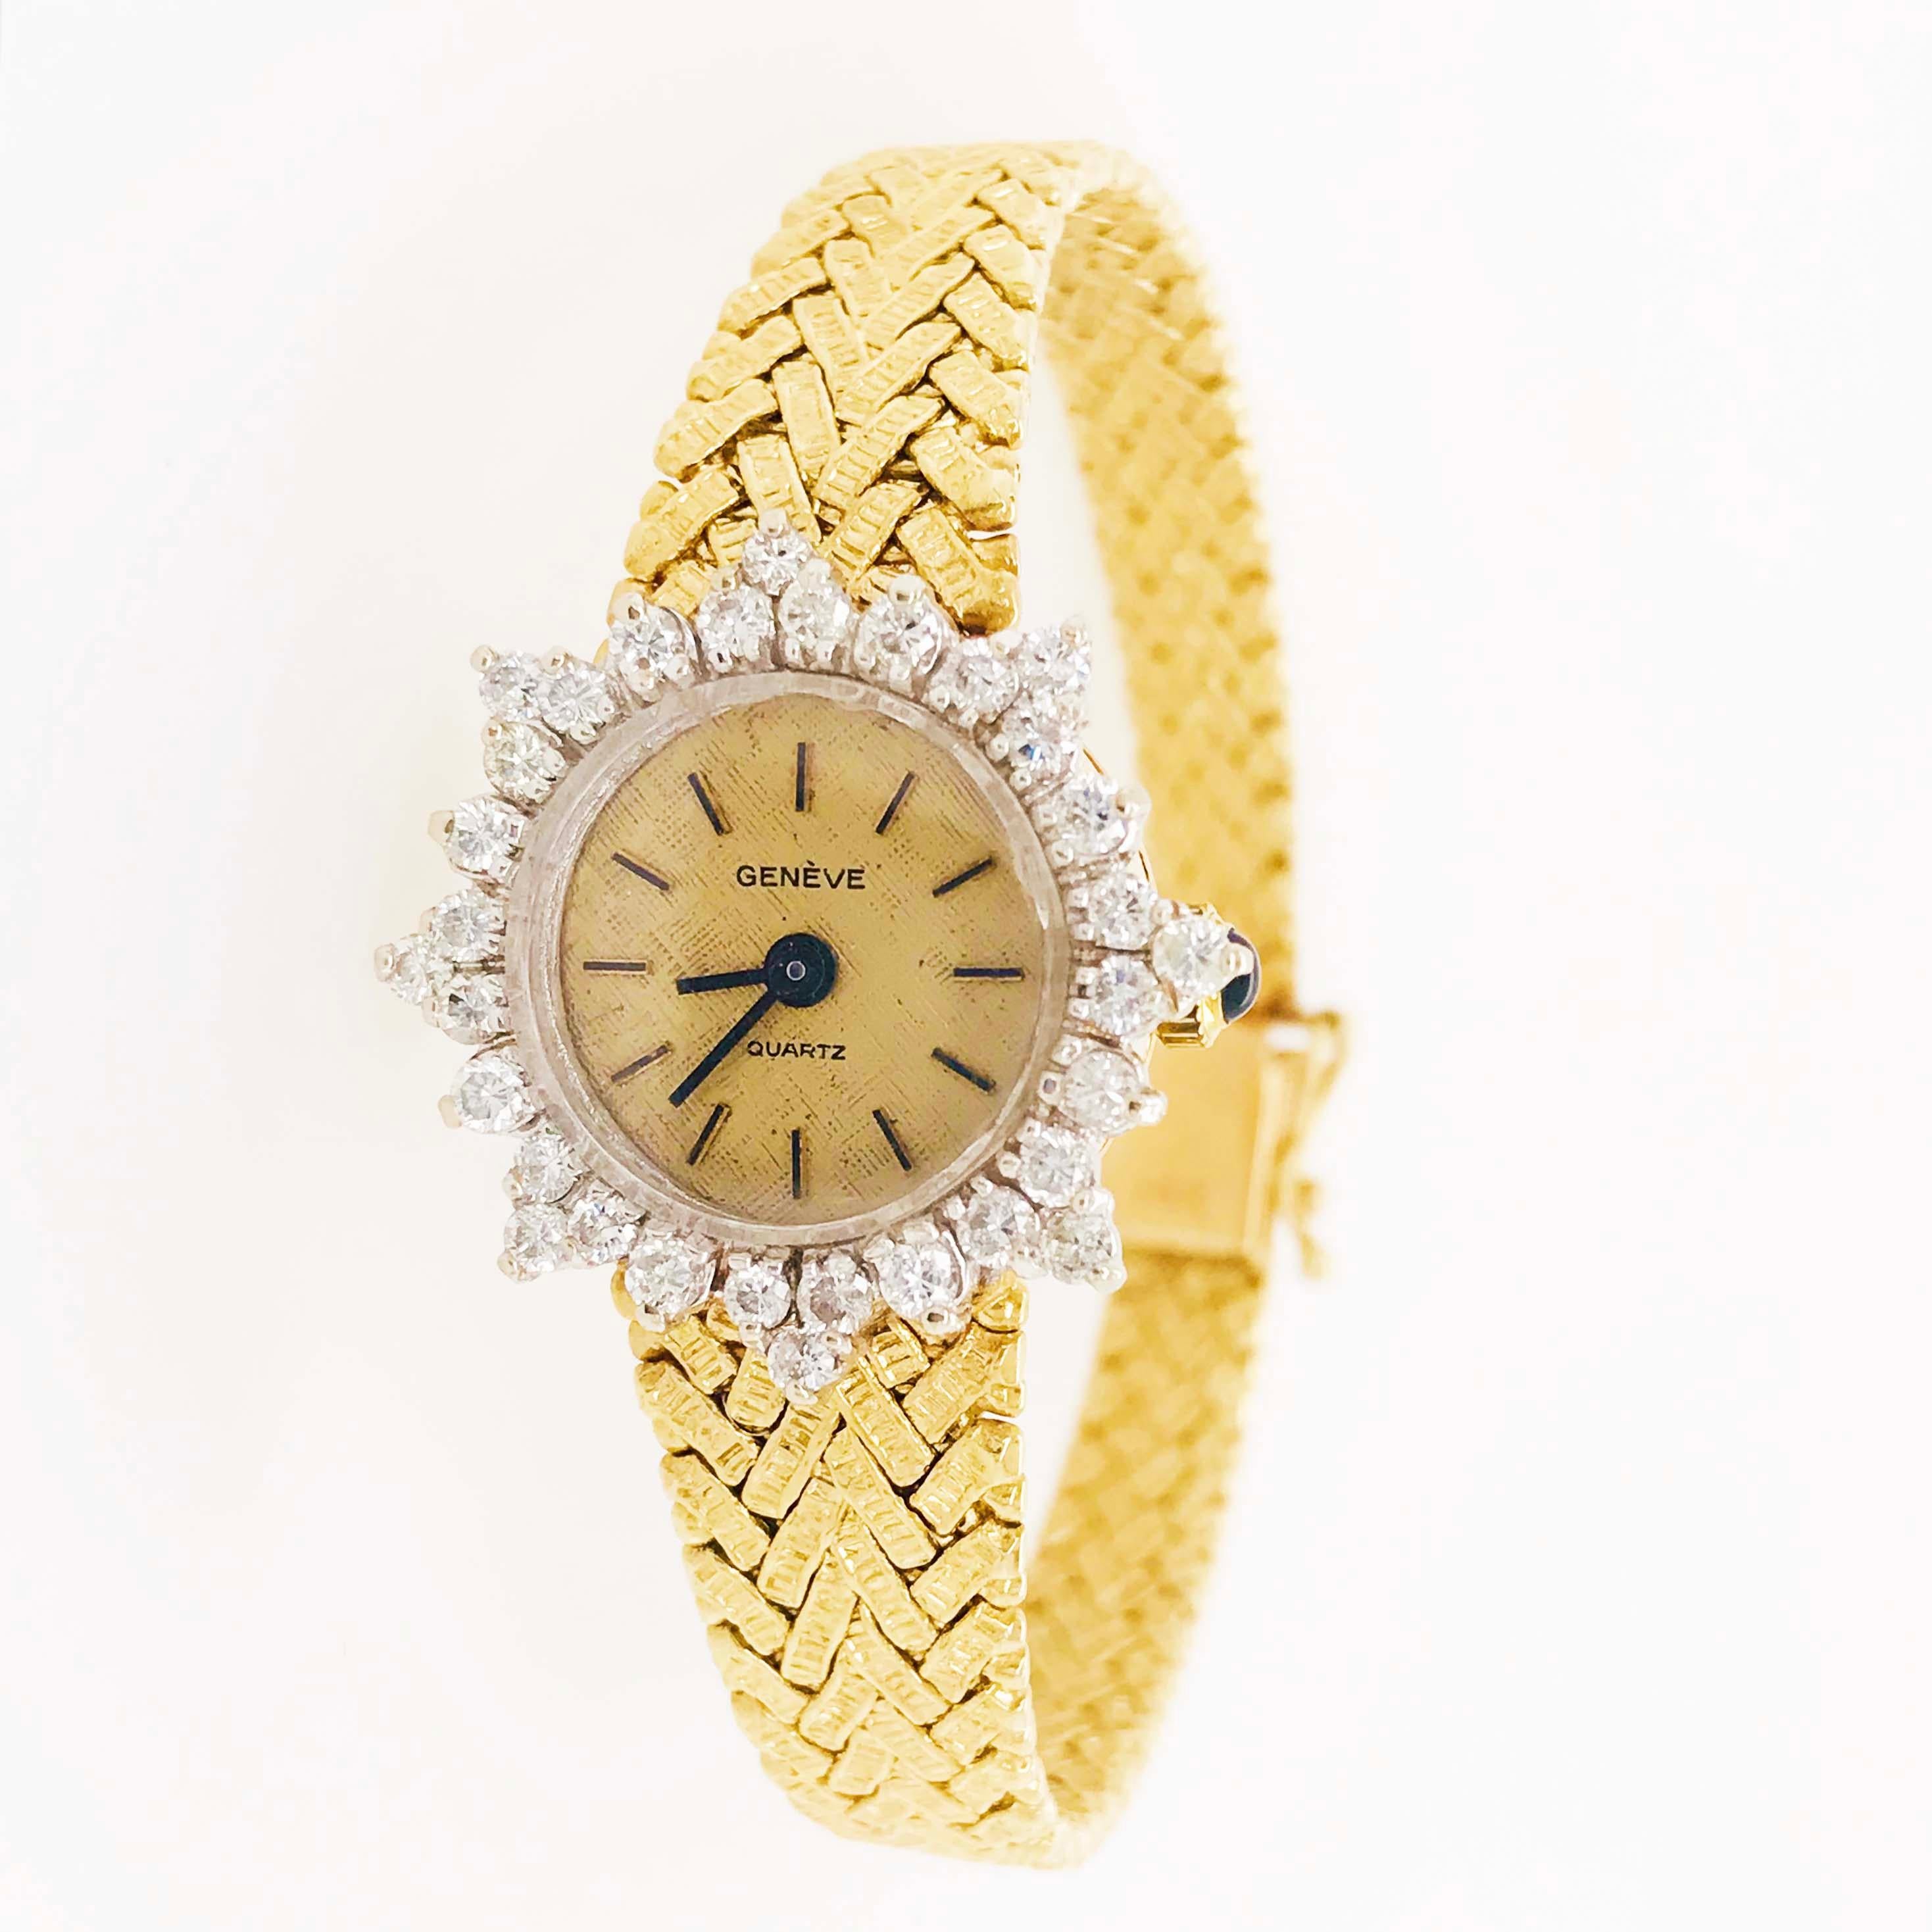 The Lady's dress watch is classy and sophisticated! The Geneve quartz diamond watch is a dress style watch with a diamond bezel and textured band. The Lady's Geneve watch is quartz movements with a classic champagne colored dial. The diamond bezel